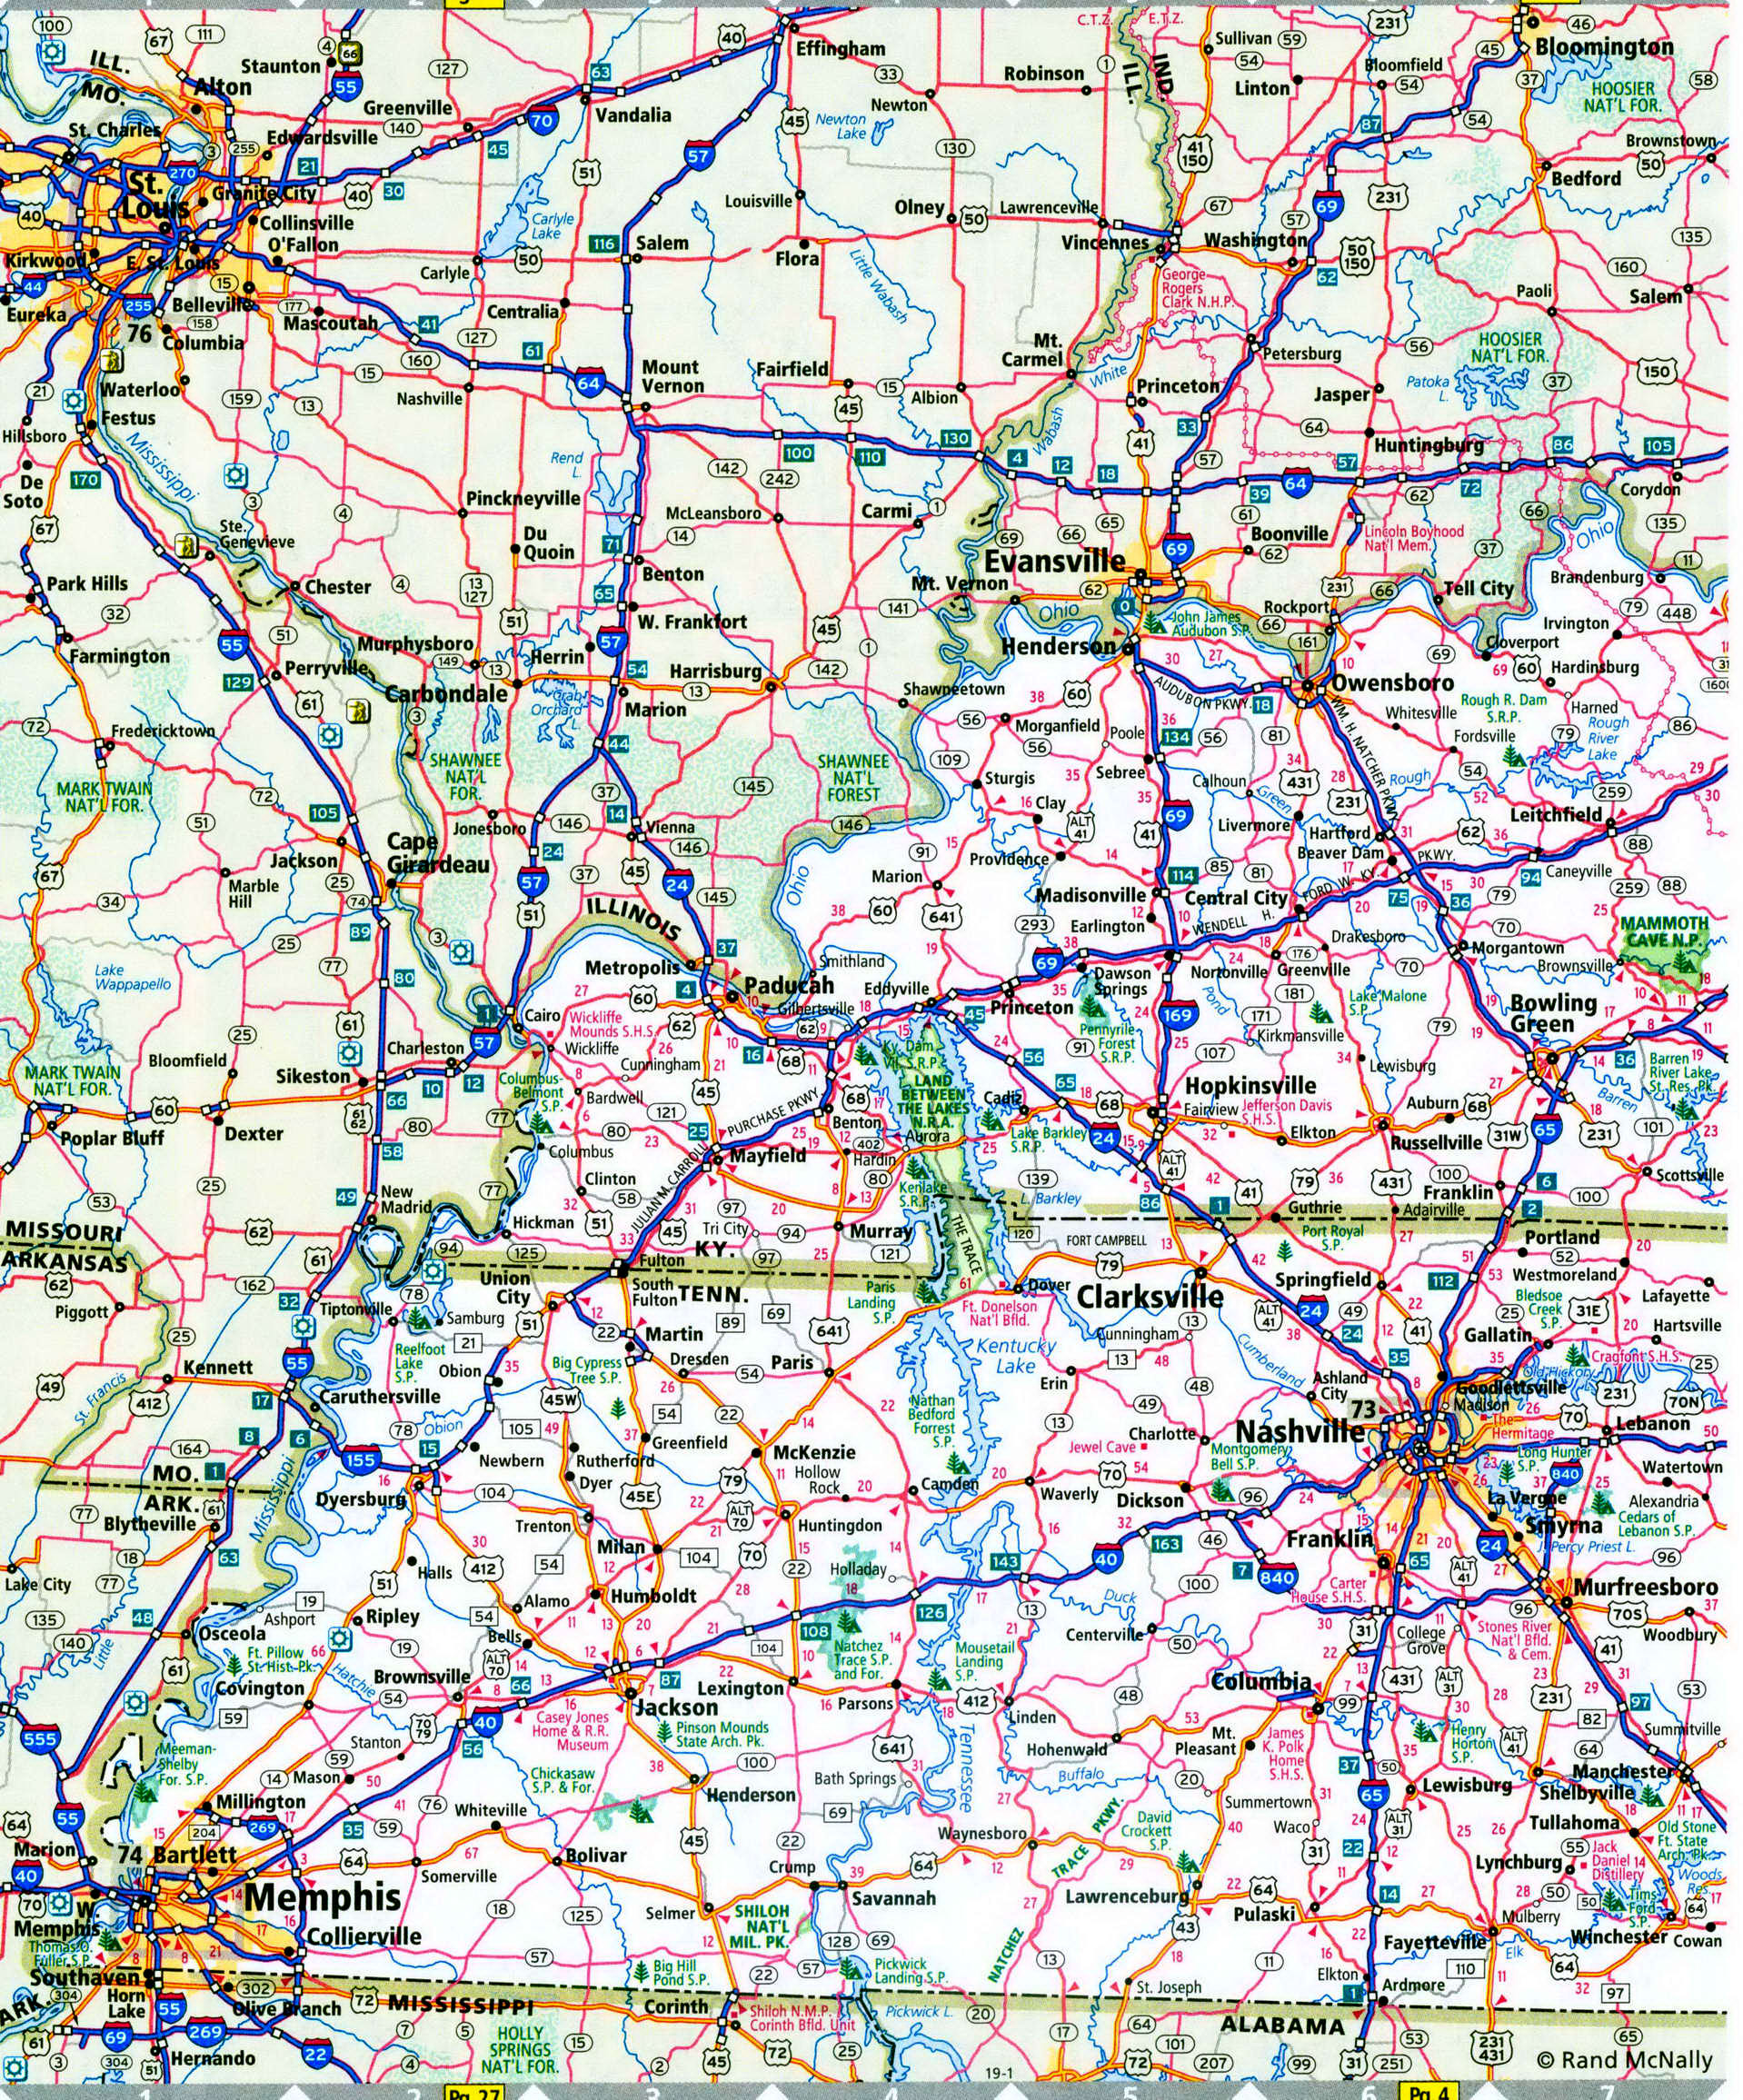 Kentuky and Tennessee interstate highways map